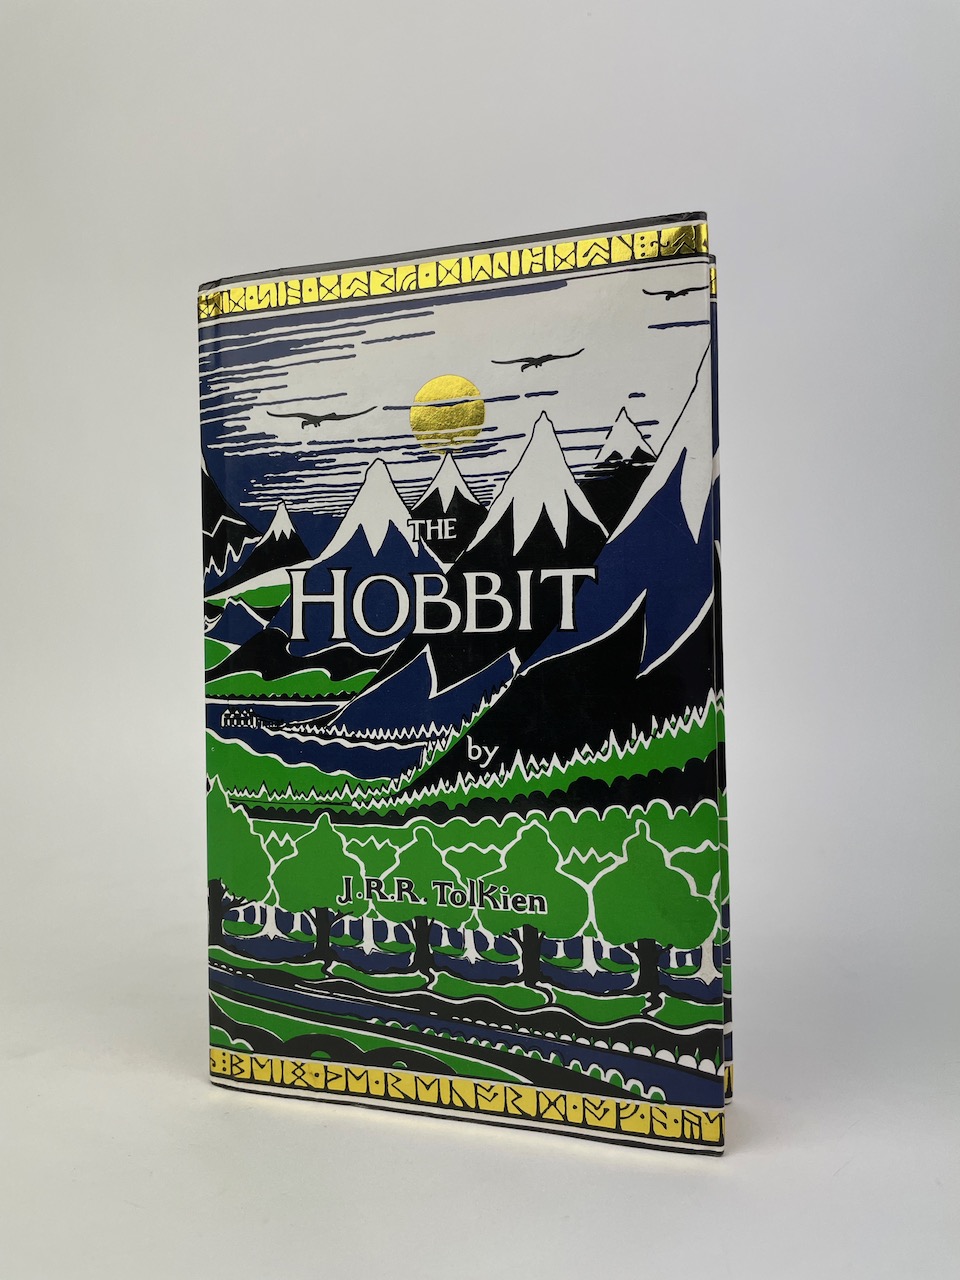 The Hobbit by J.R.R. Tolkien published by HarperCollins in 1995